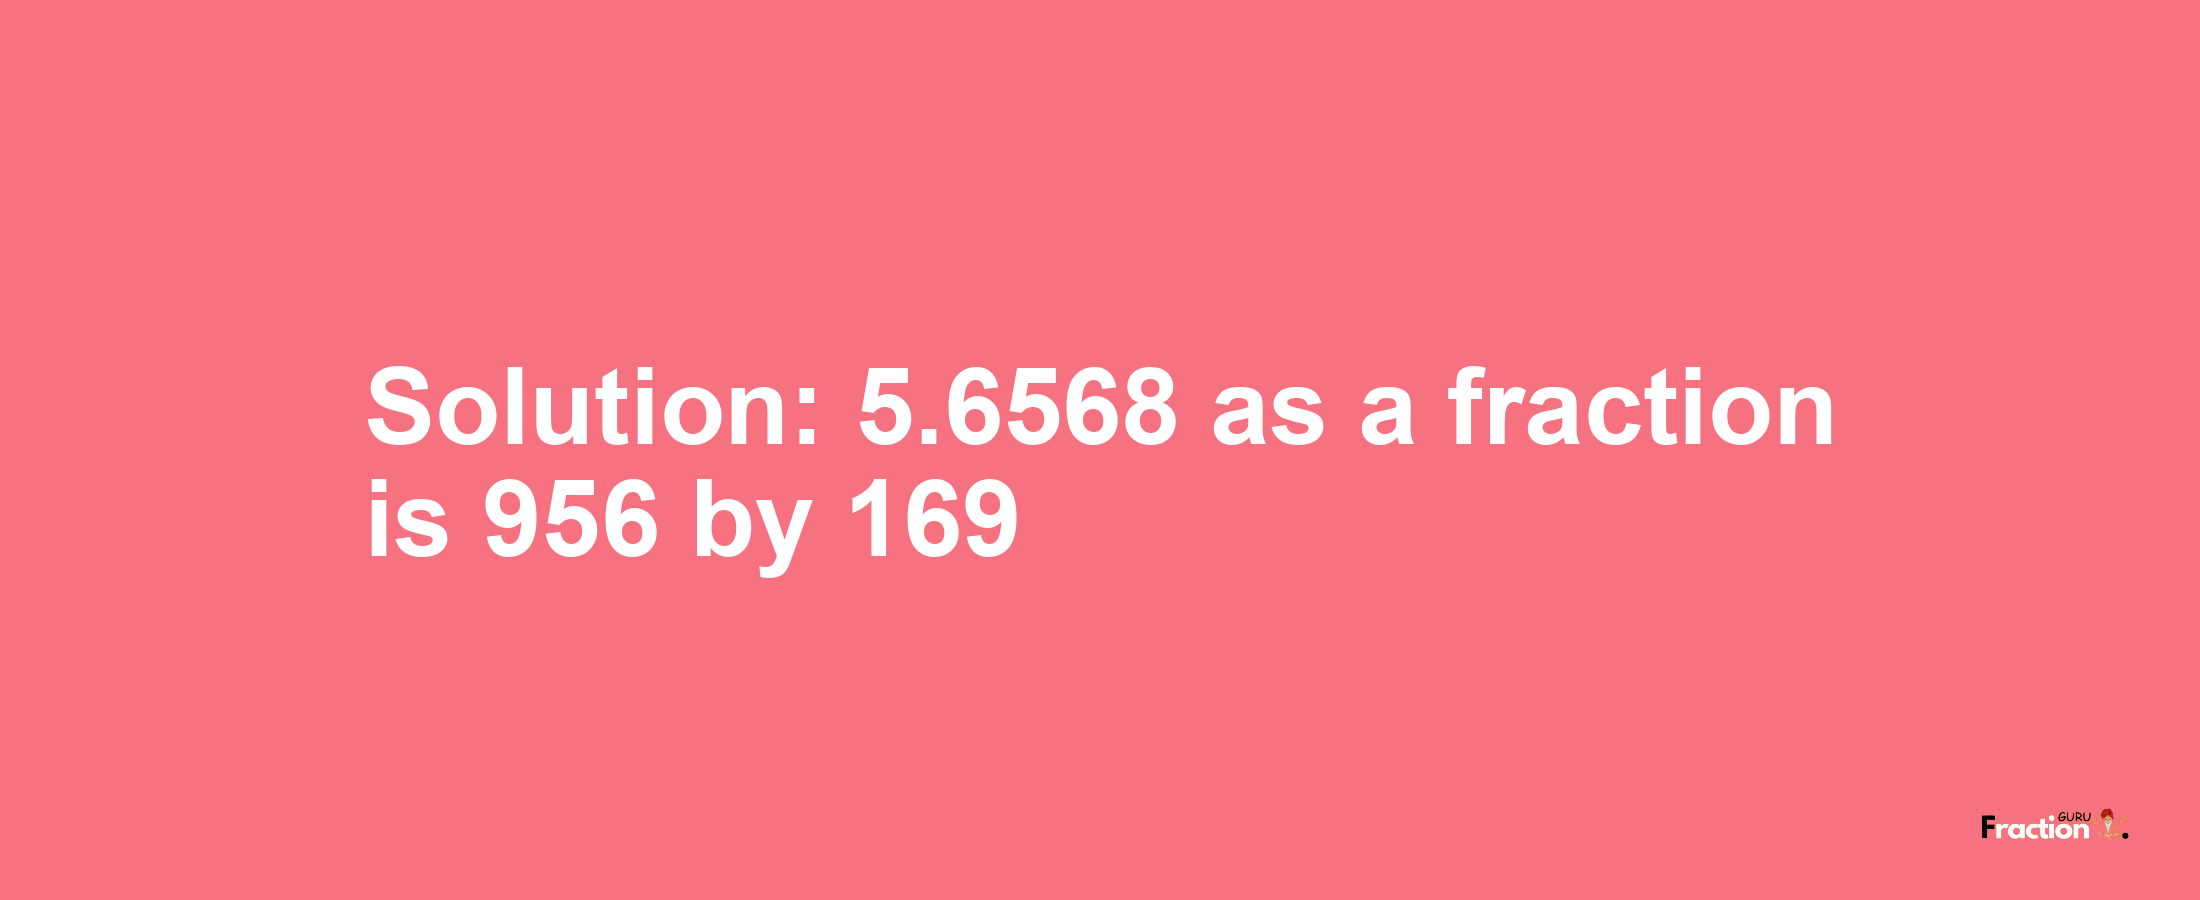 Solution:5.6568 as a fraction is 956/169